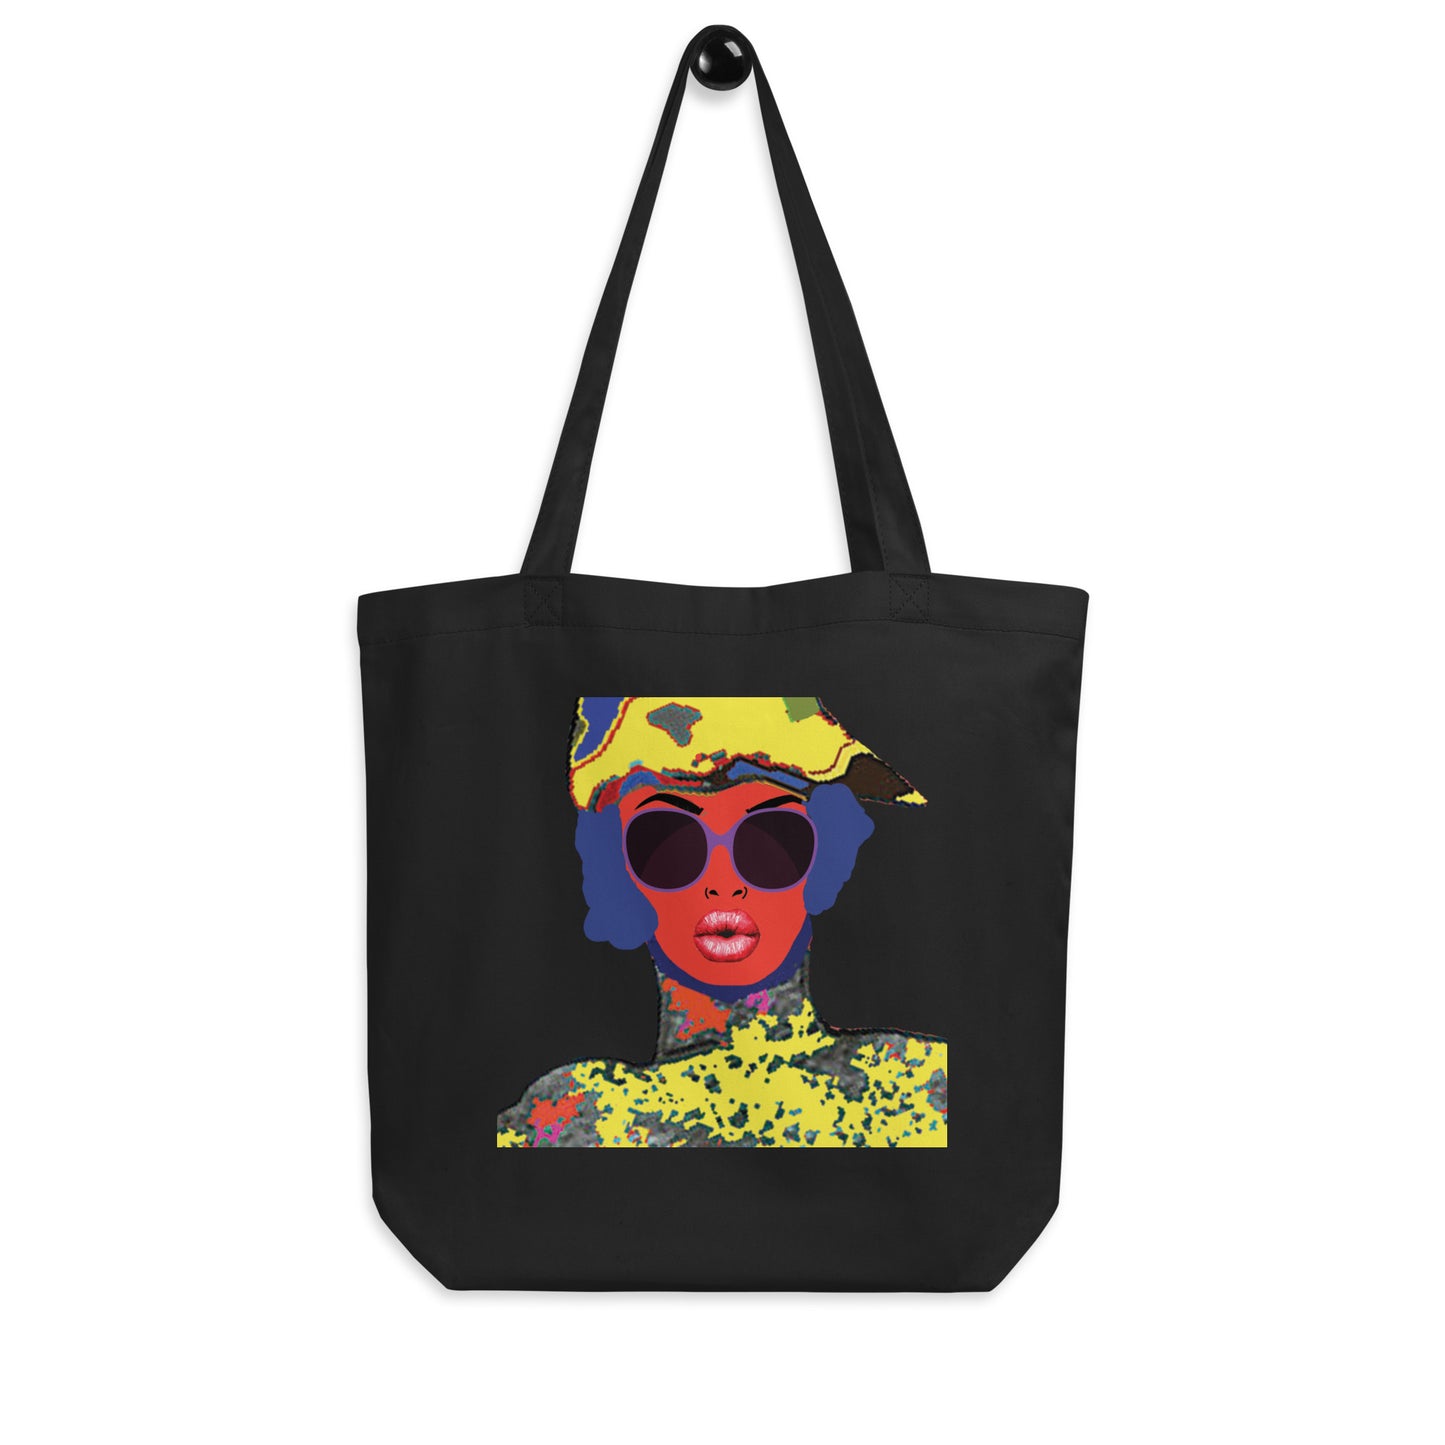 I am sure of it too - Organic Cotton Art Tote